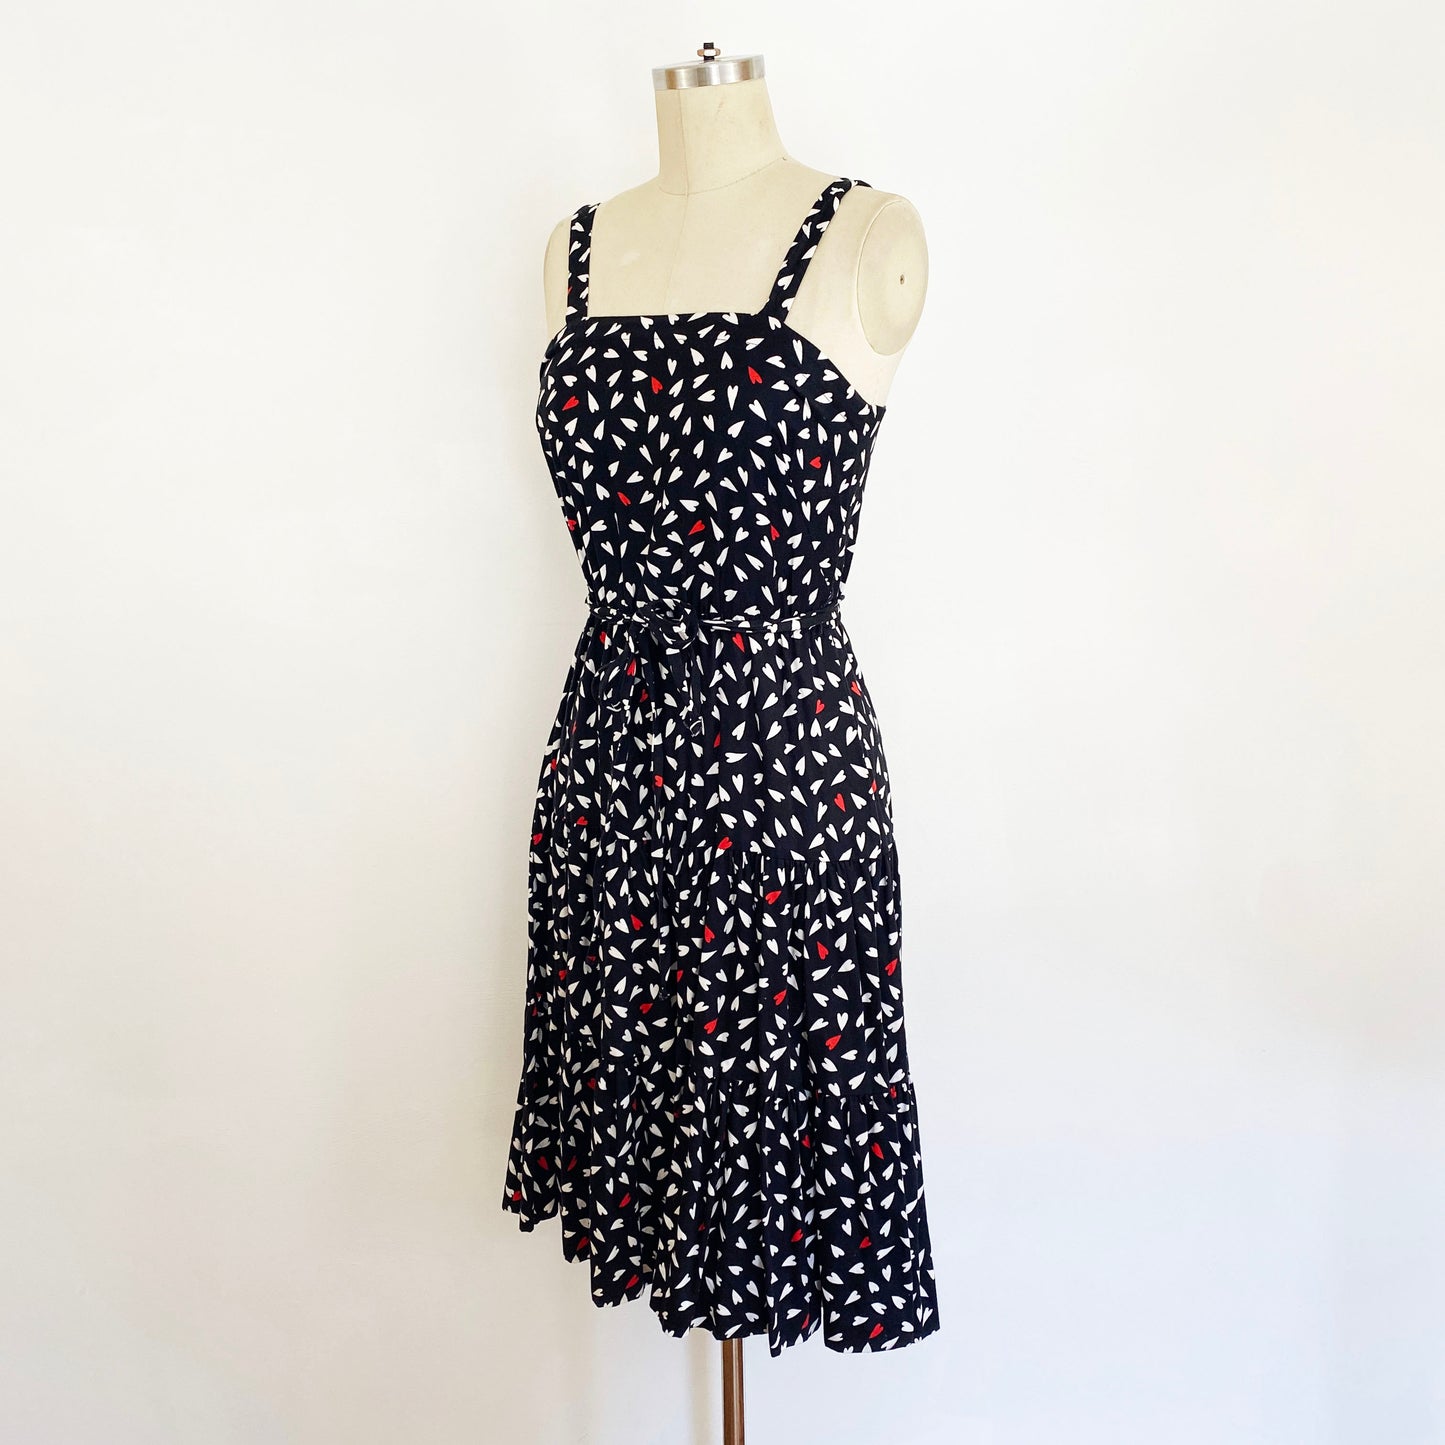 1970s Black and White Red Heart Fit and Flare Cotton Sundress Cute Playful Dress Vintage Love Dress / Murray Meisner / Small